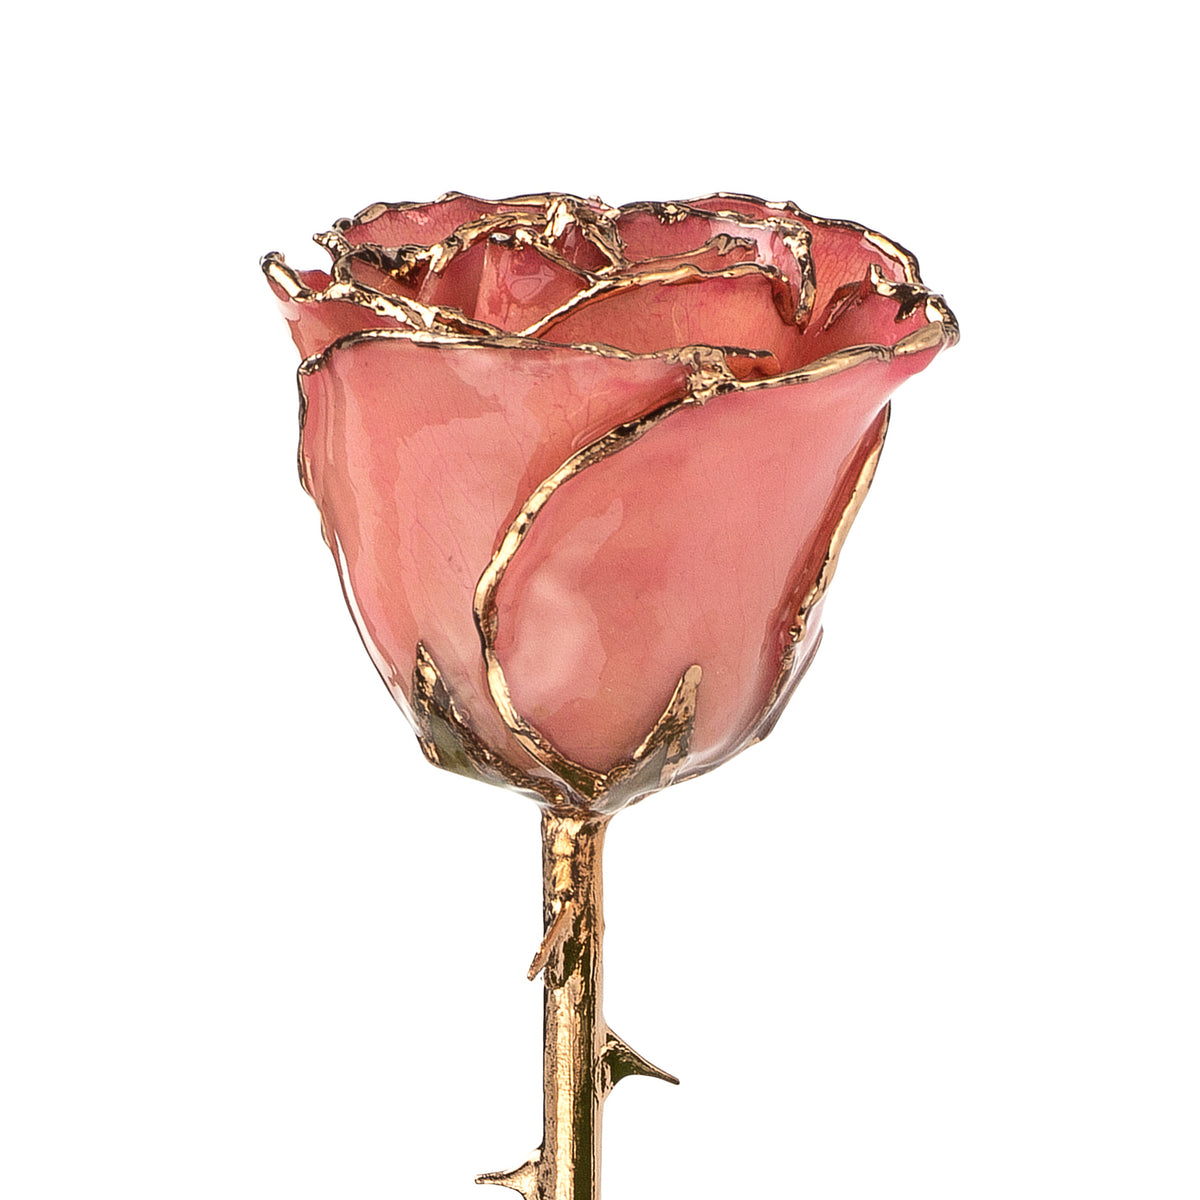 24K Gold Trimmed Forever Rose with Pink Petals. View of Stem, Leaves, and Rose Petals and Showing Detail of Gold Trim